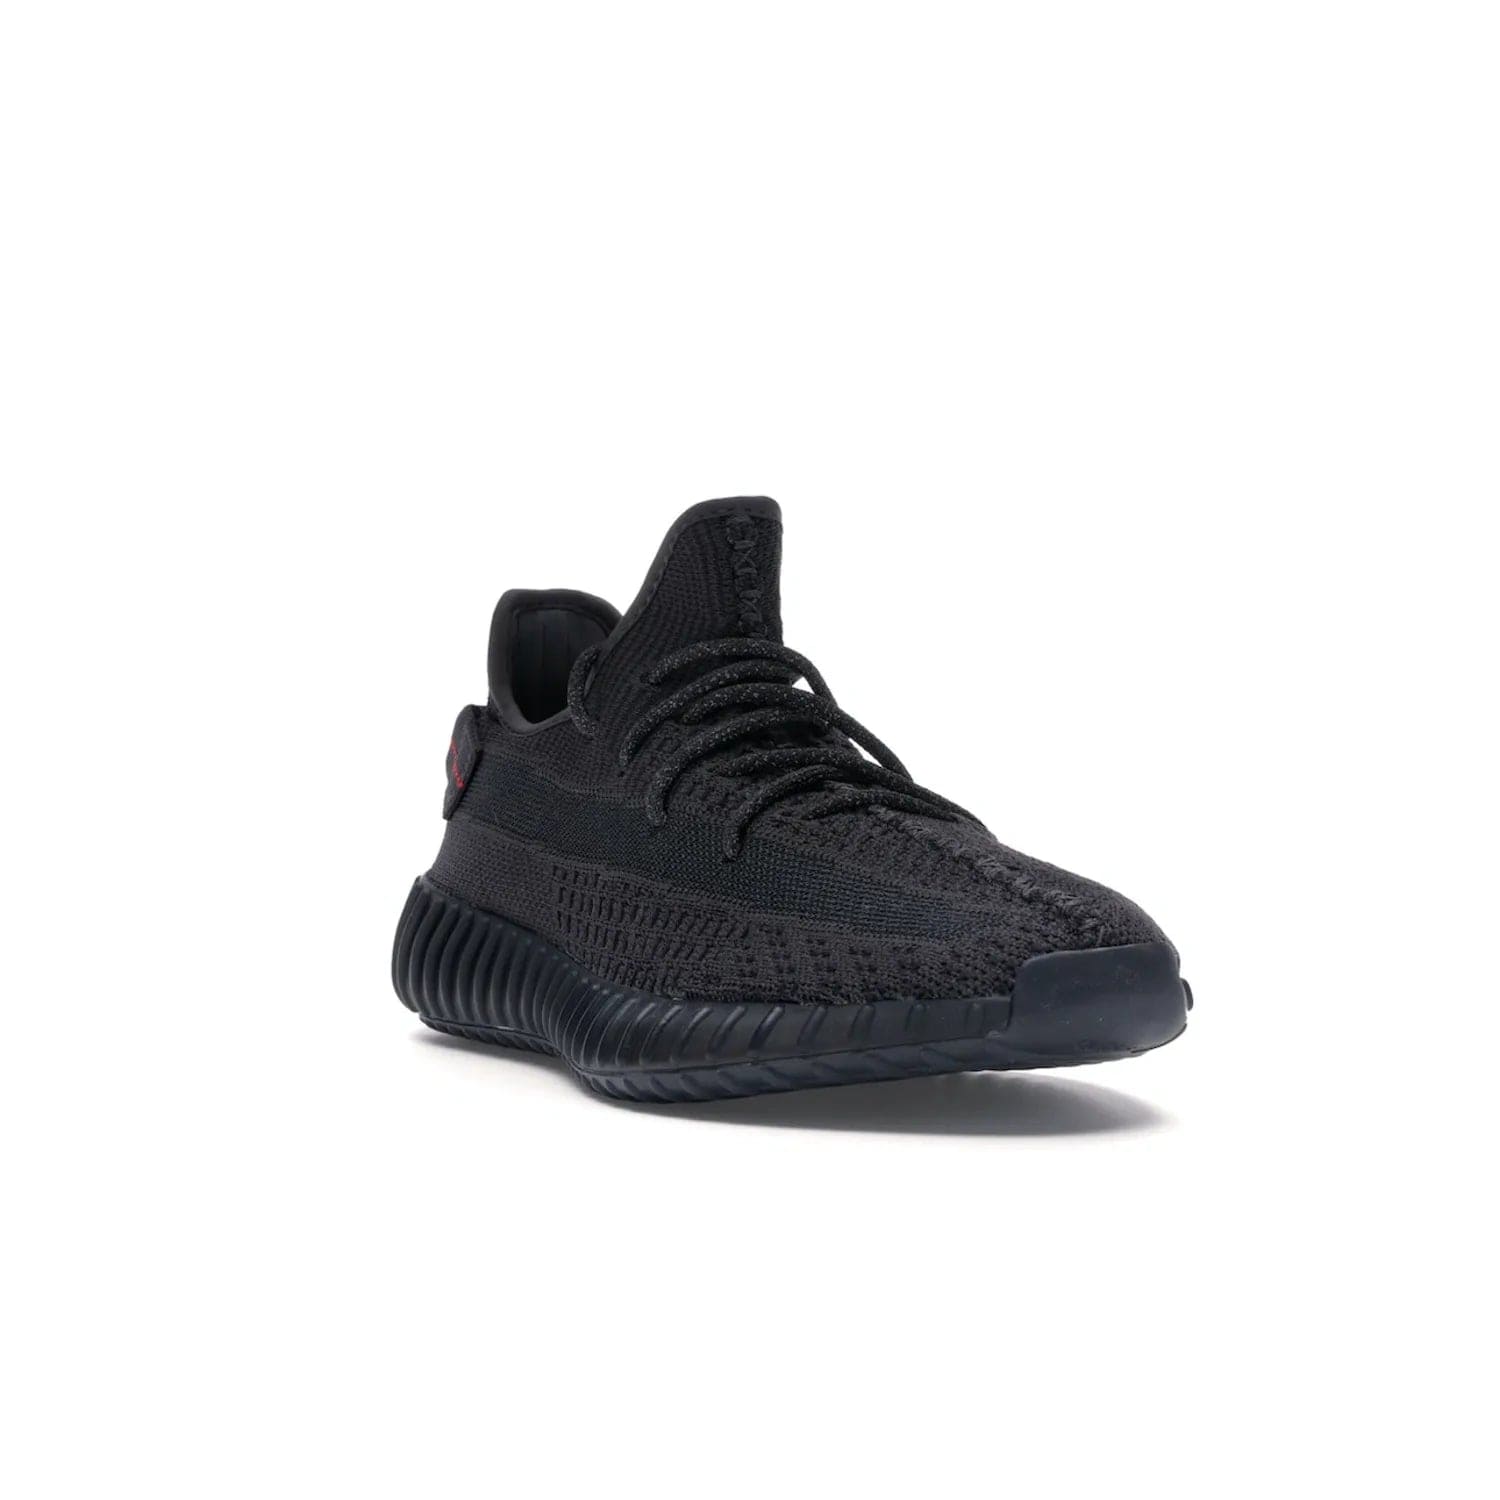 adidas Yeezy Boost 350 V2 Black (Non-Reflective) - Image 7 - Only at www.BallersClubKickz.com - A timeless, sleek silhouette crafted from quality materials. The adidas Yeezy Boost 350 V2 Black (Non-Reflective) brings style and sophistication. Get yours now!